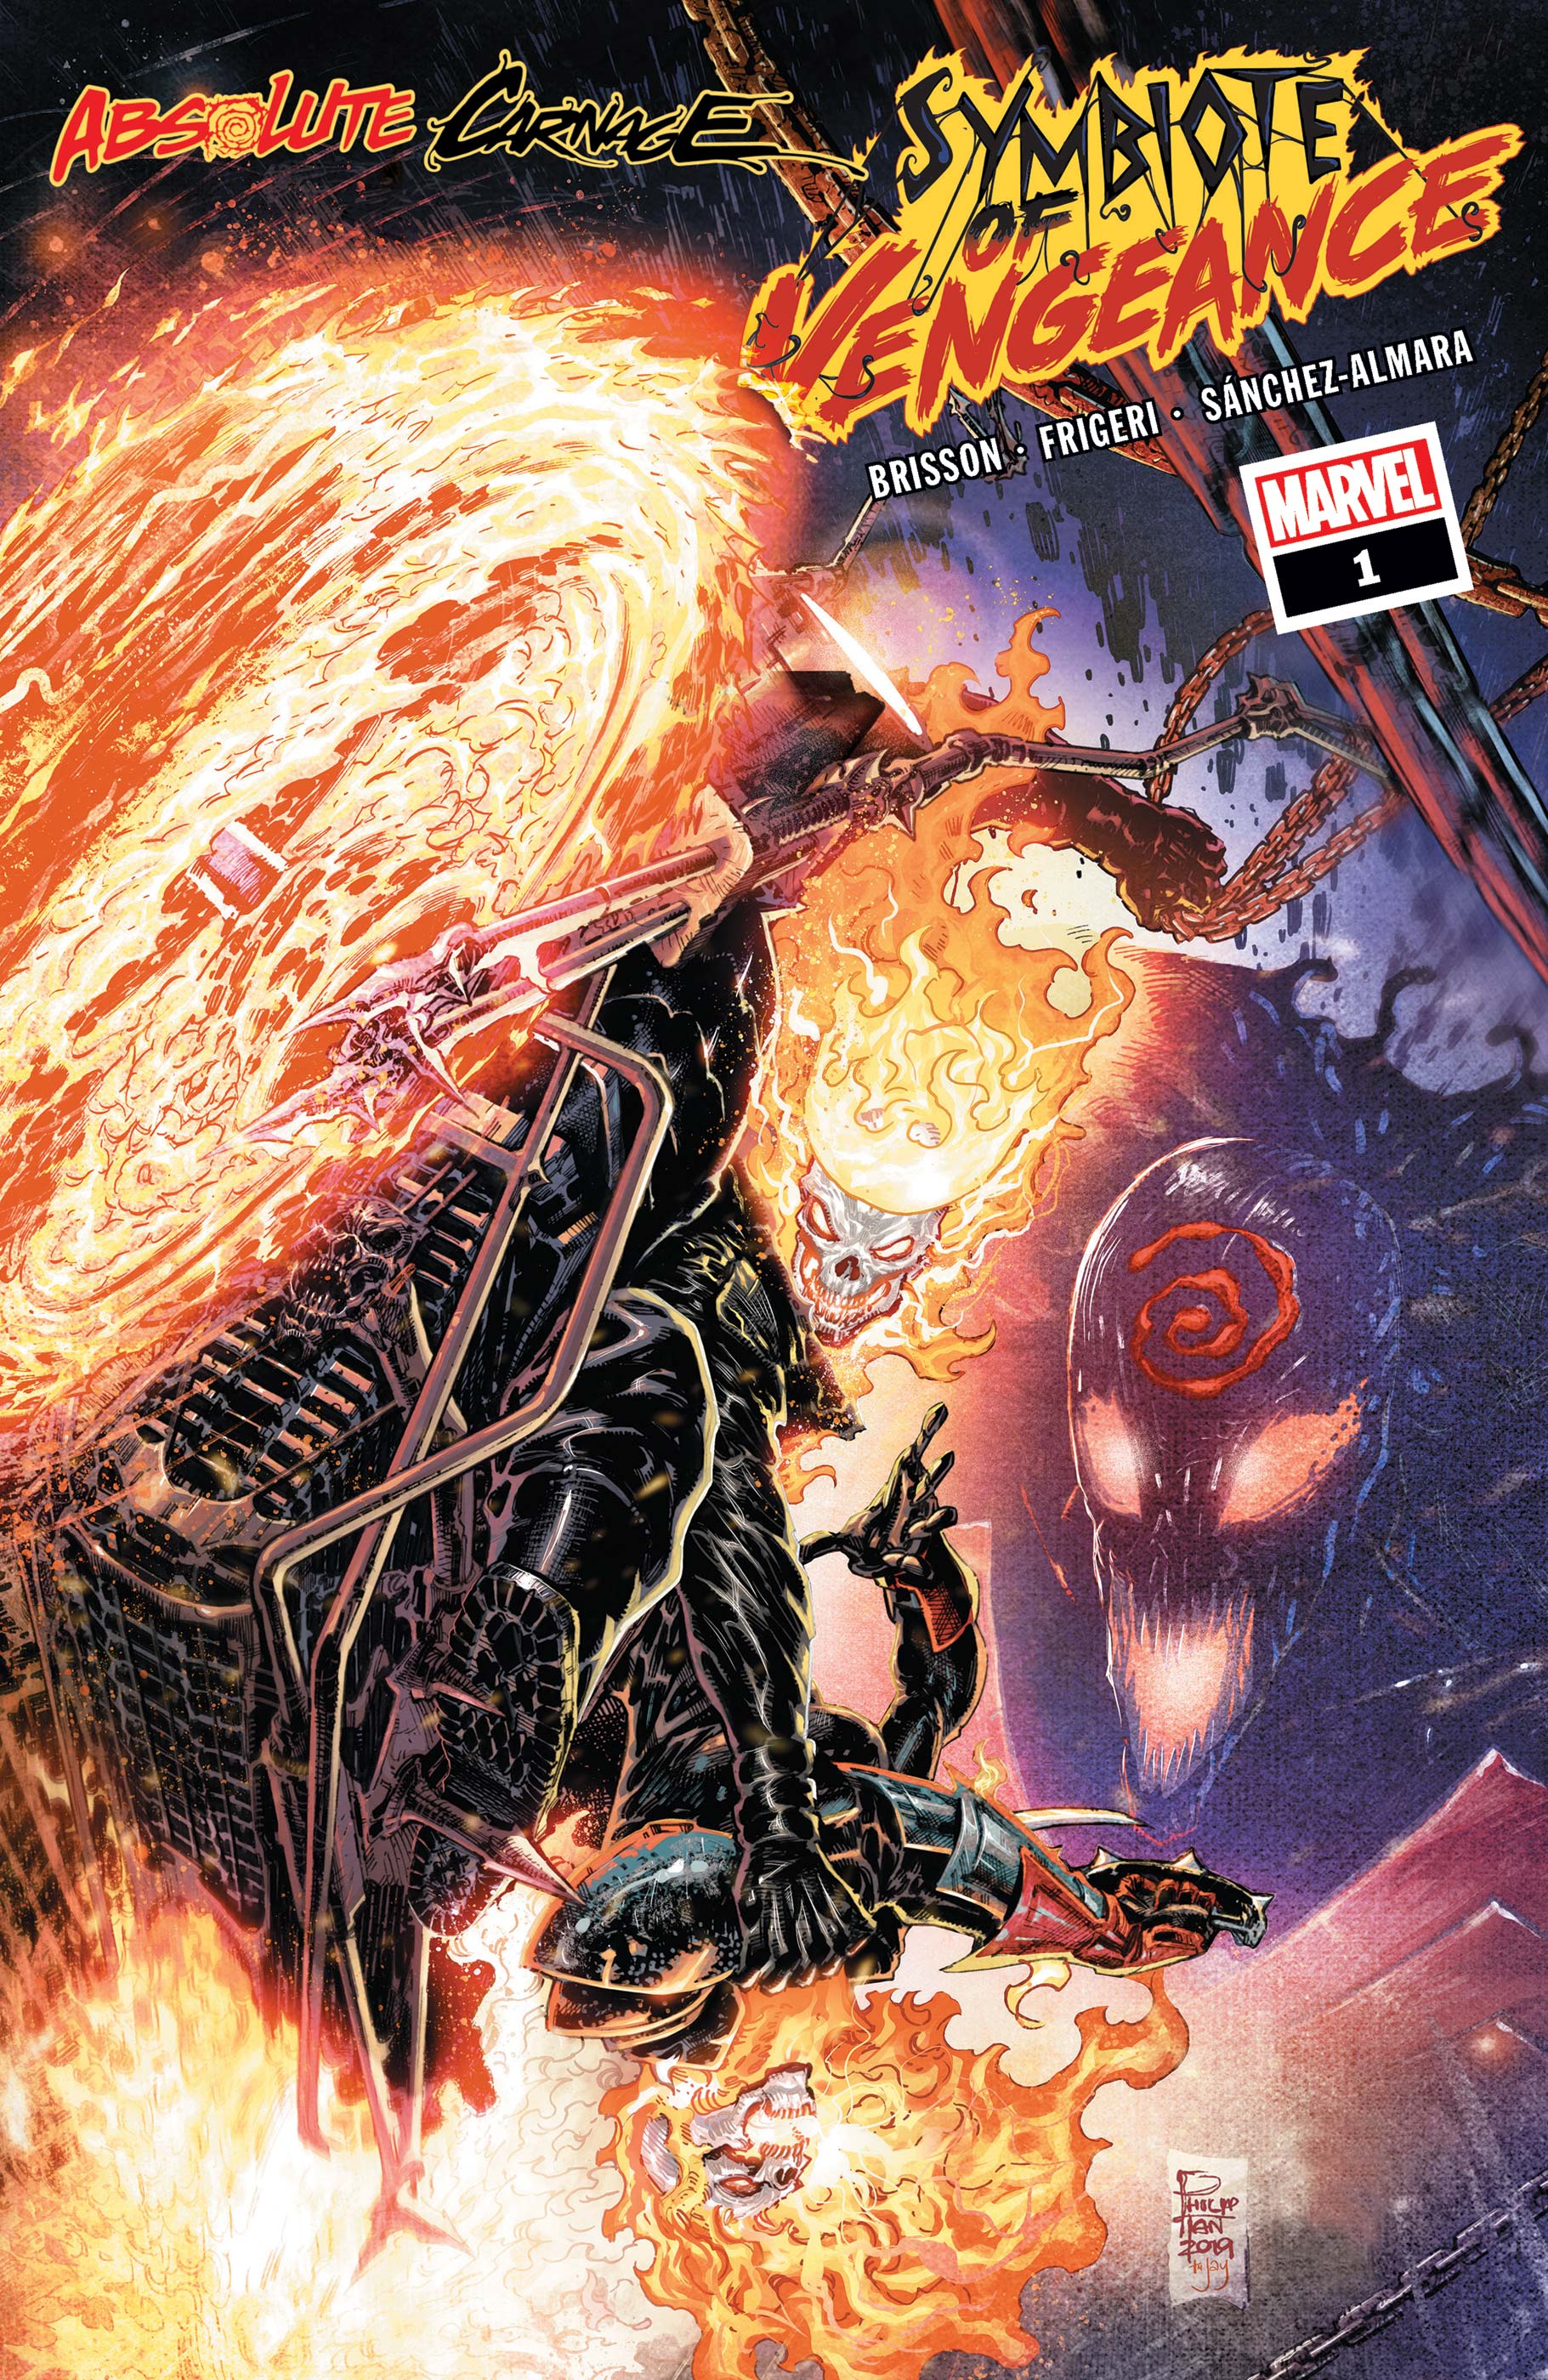 Absolute Carnage: Symbiote Of Vengeance (2019) #1